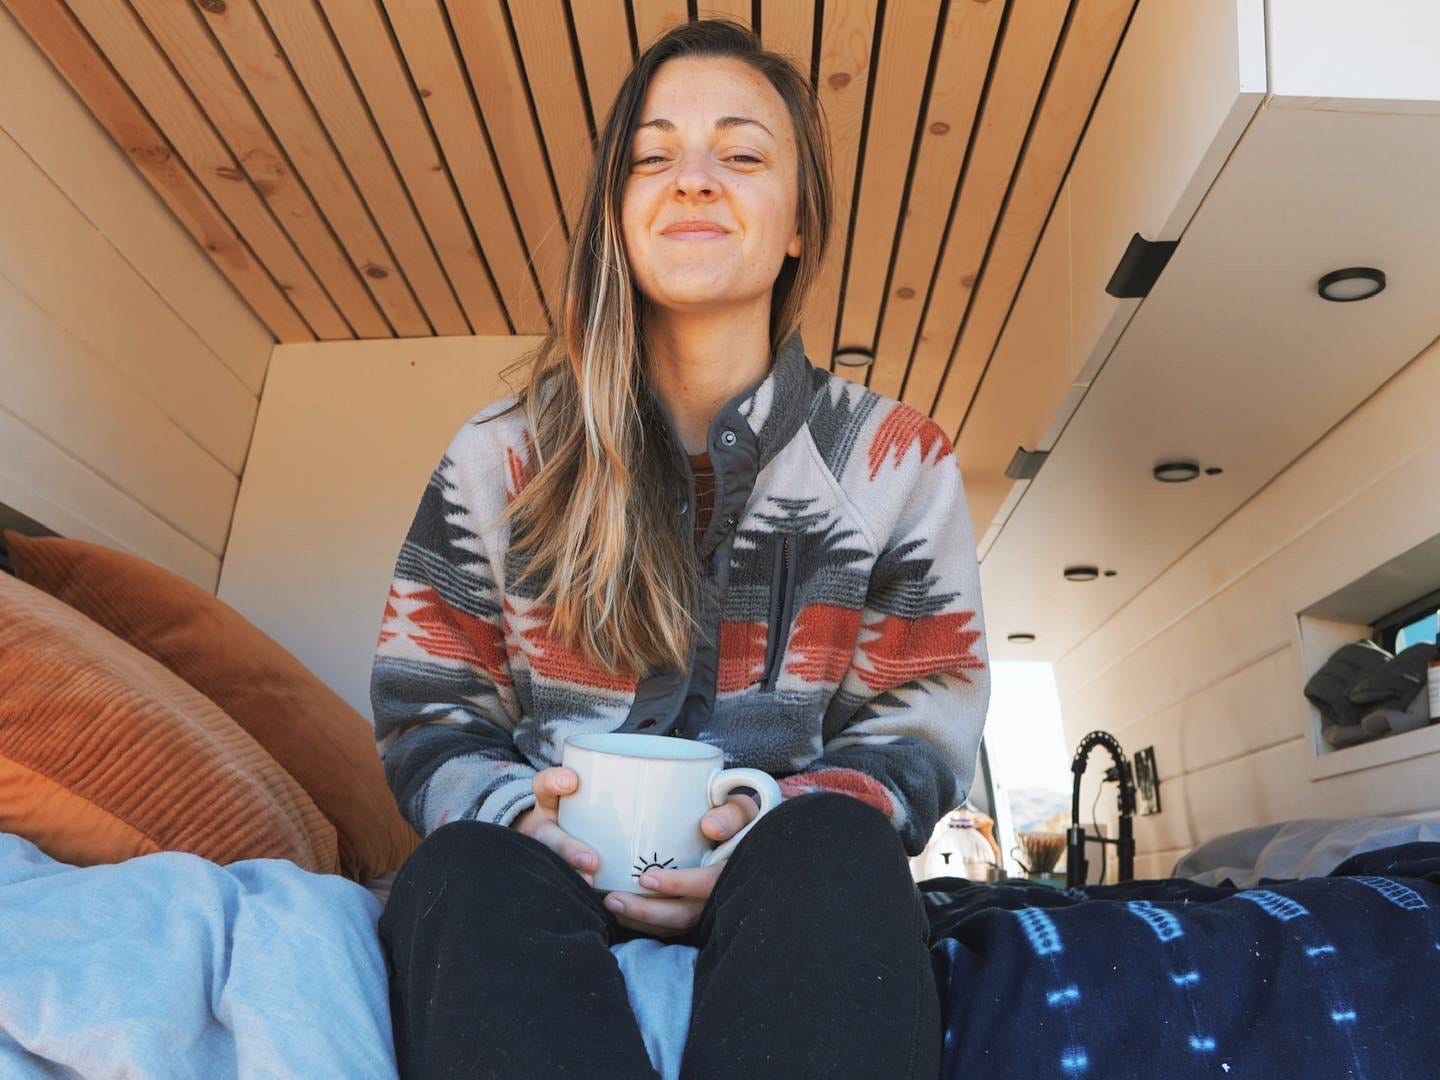 A woman wearing a grey and red sweater sits on her bed smiling and holding a mug.